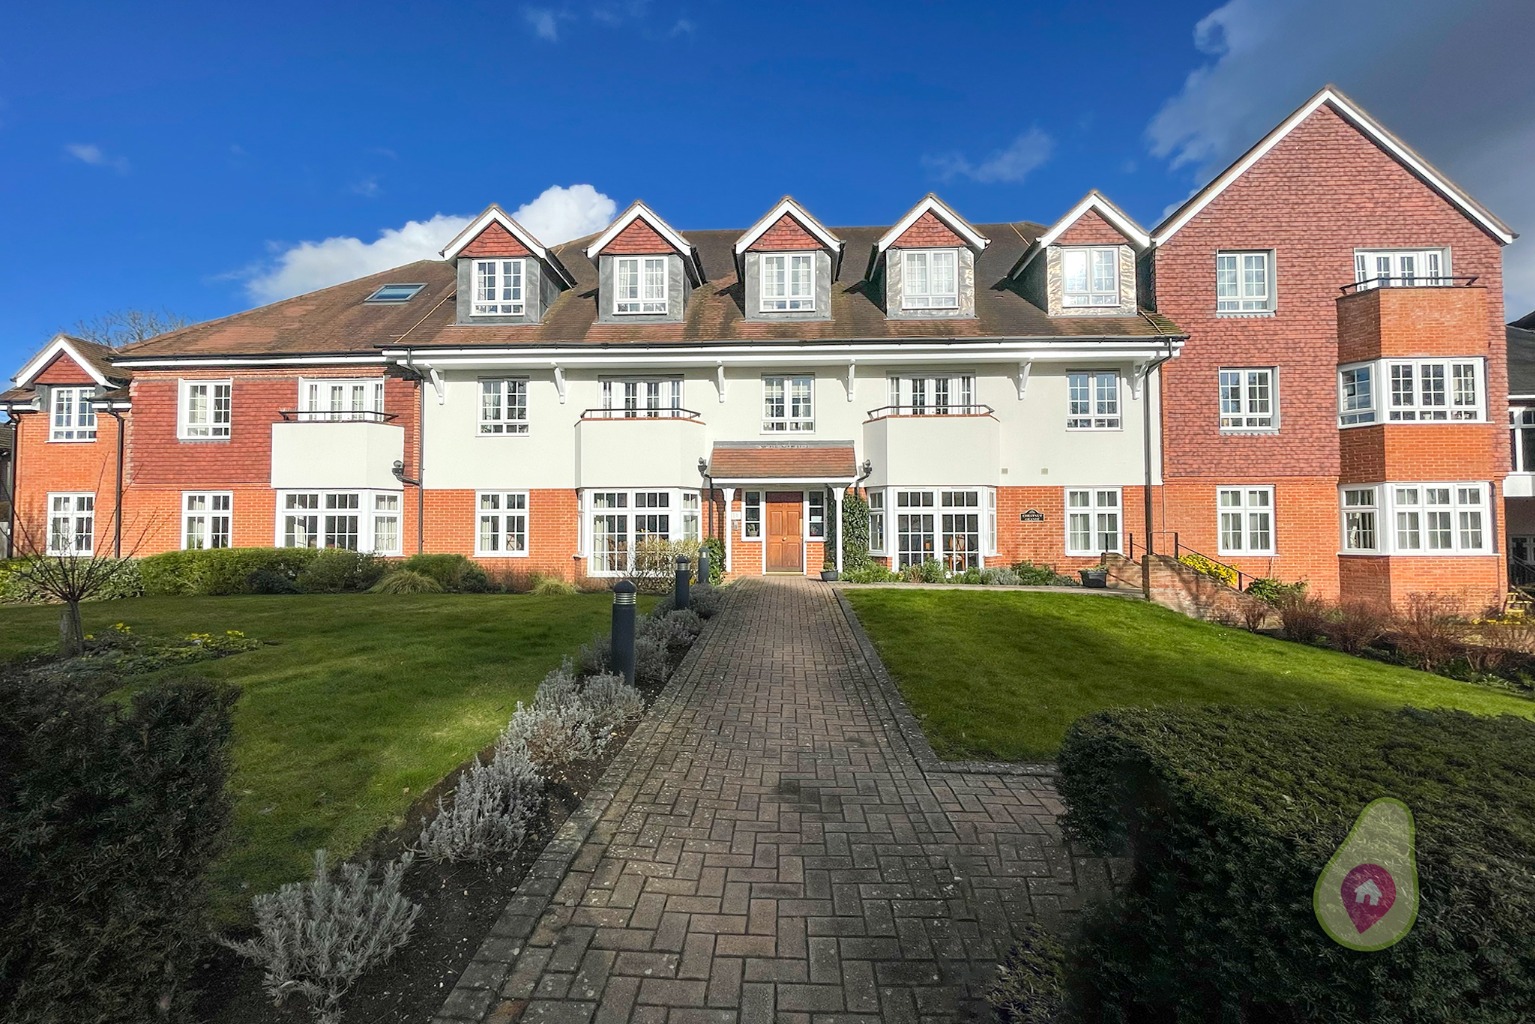 The largest two bedroom apartment within Chestnut Grange, there is plenty of space and far reaching views across the rooftops of Wokingham and beyond. Ideally located strolling distance to Waitrose and Wokingham Town Centre, this really is a lovely property for someone looking to downsize.